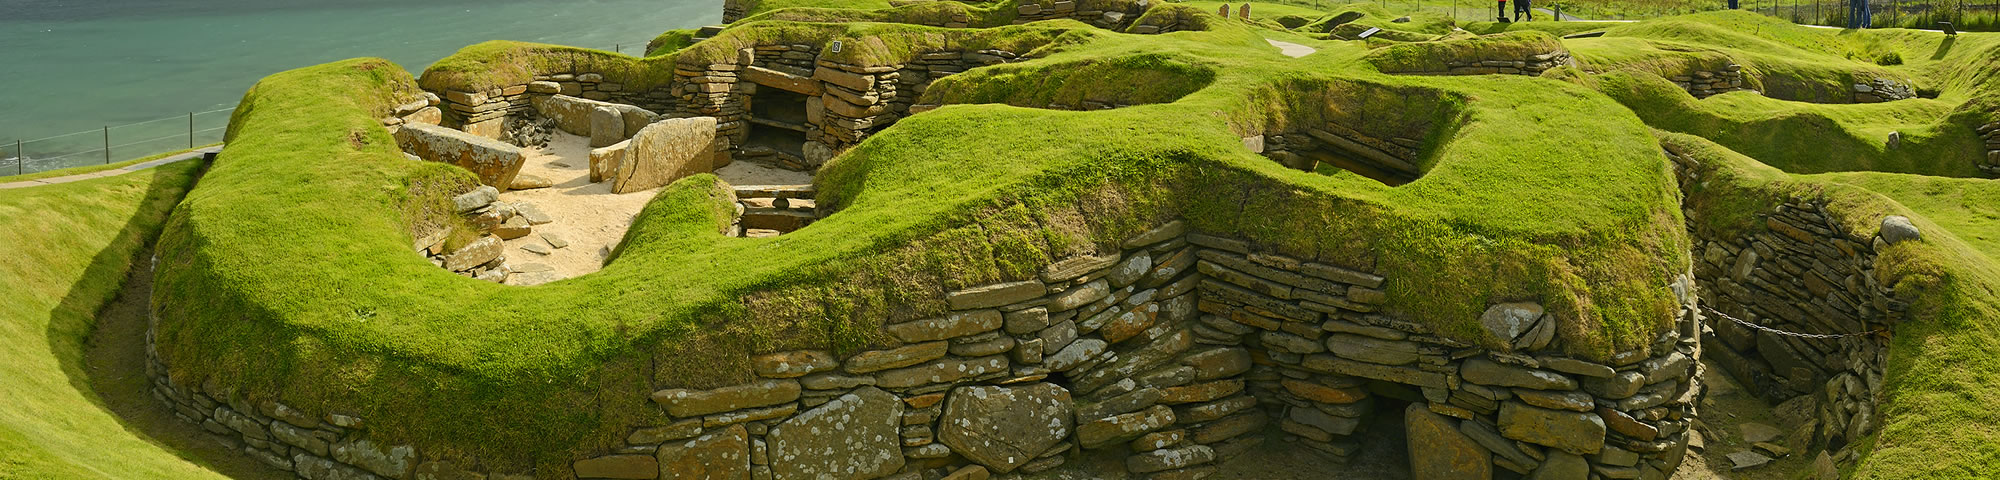 Skara Brae, Part of the Heart of Neolithic Orkney